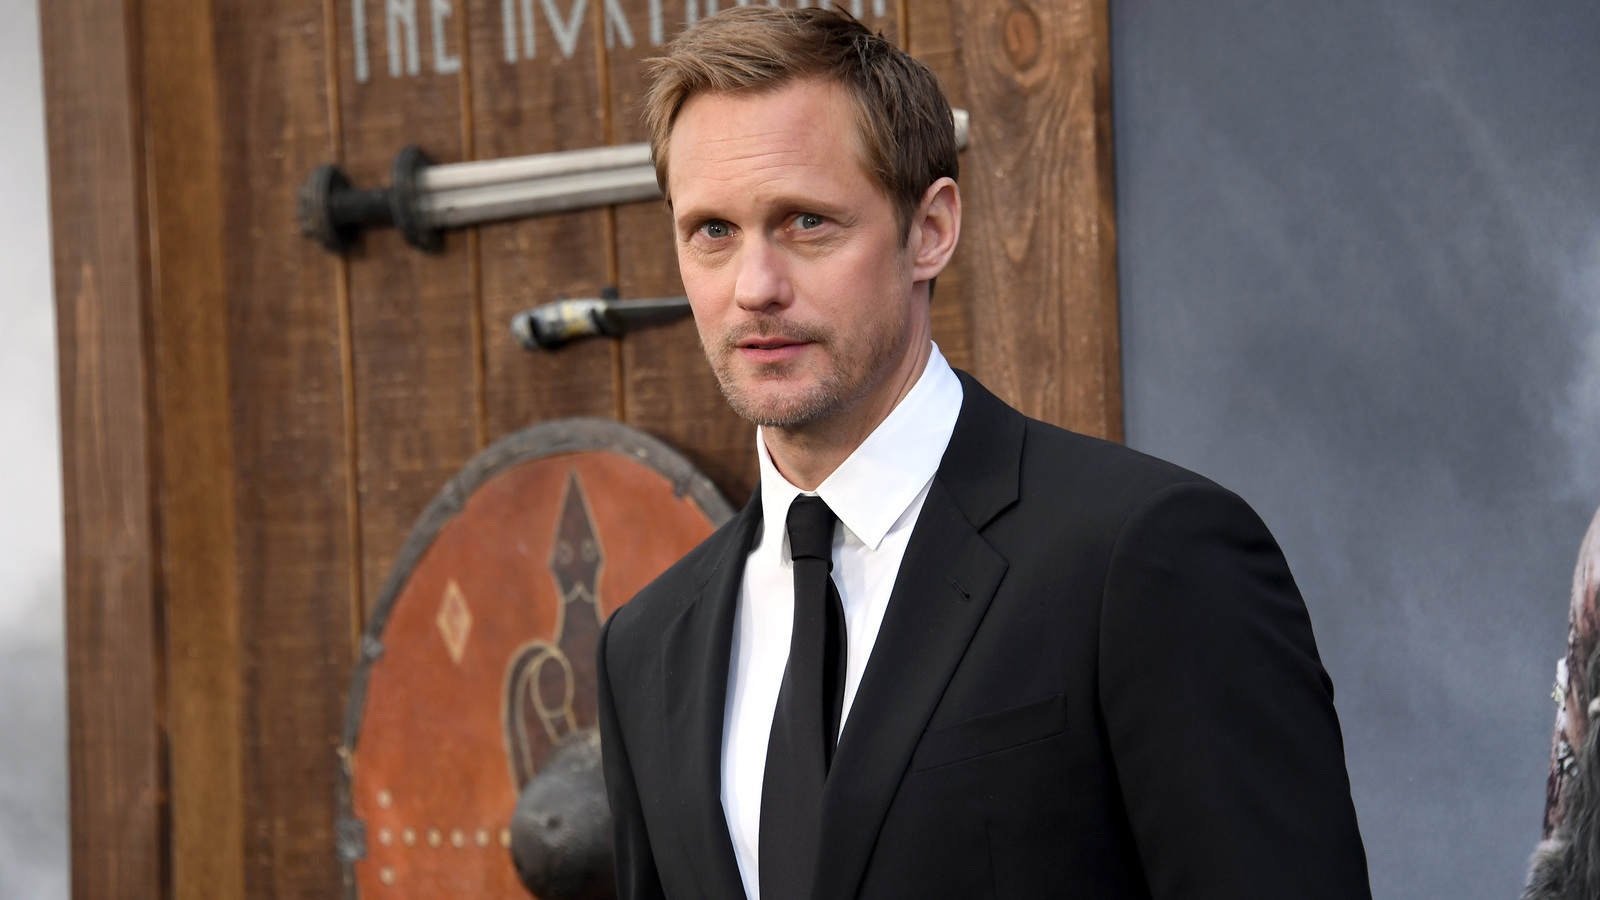 Alexander Skarsgård attends the Los Angeles premiere of "The Northman" at TCL Chinese Theatre